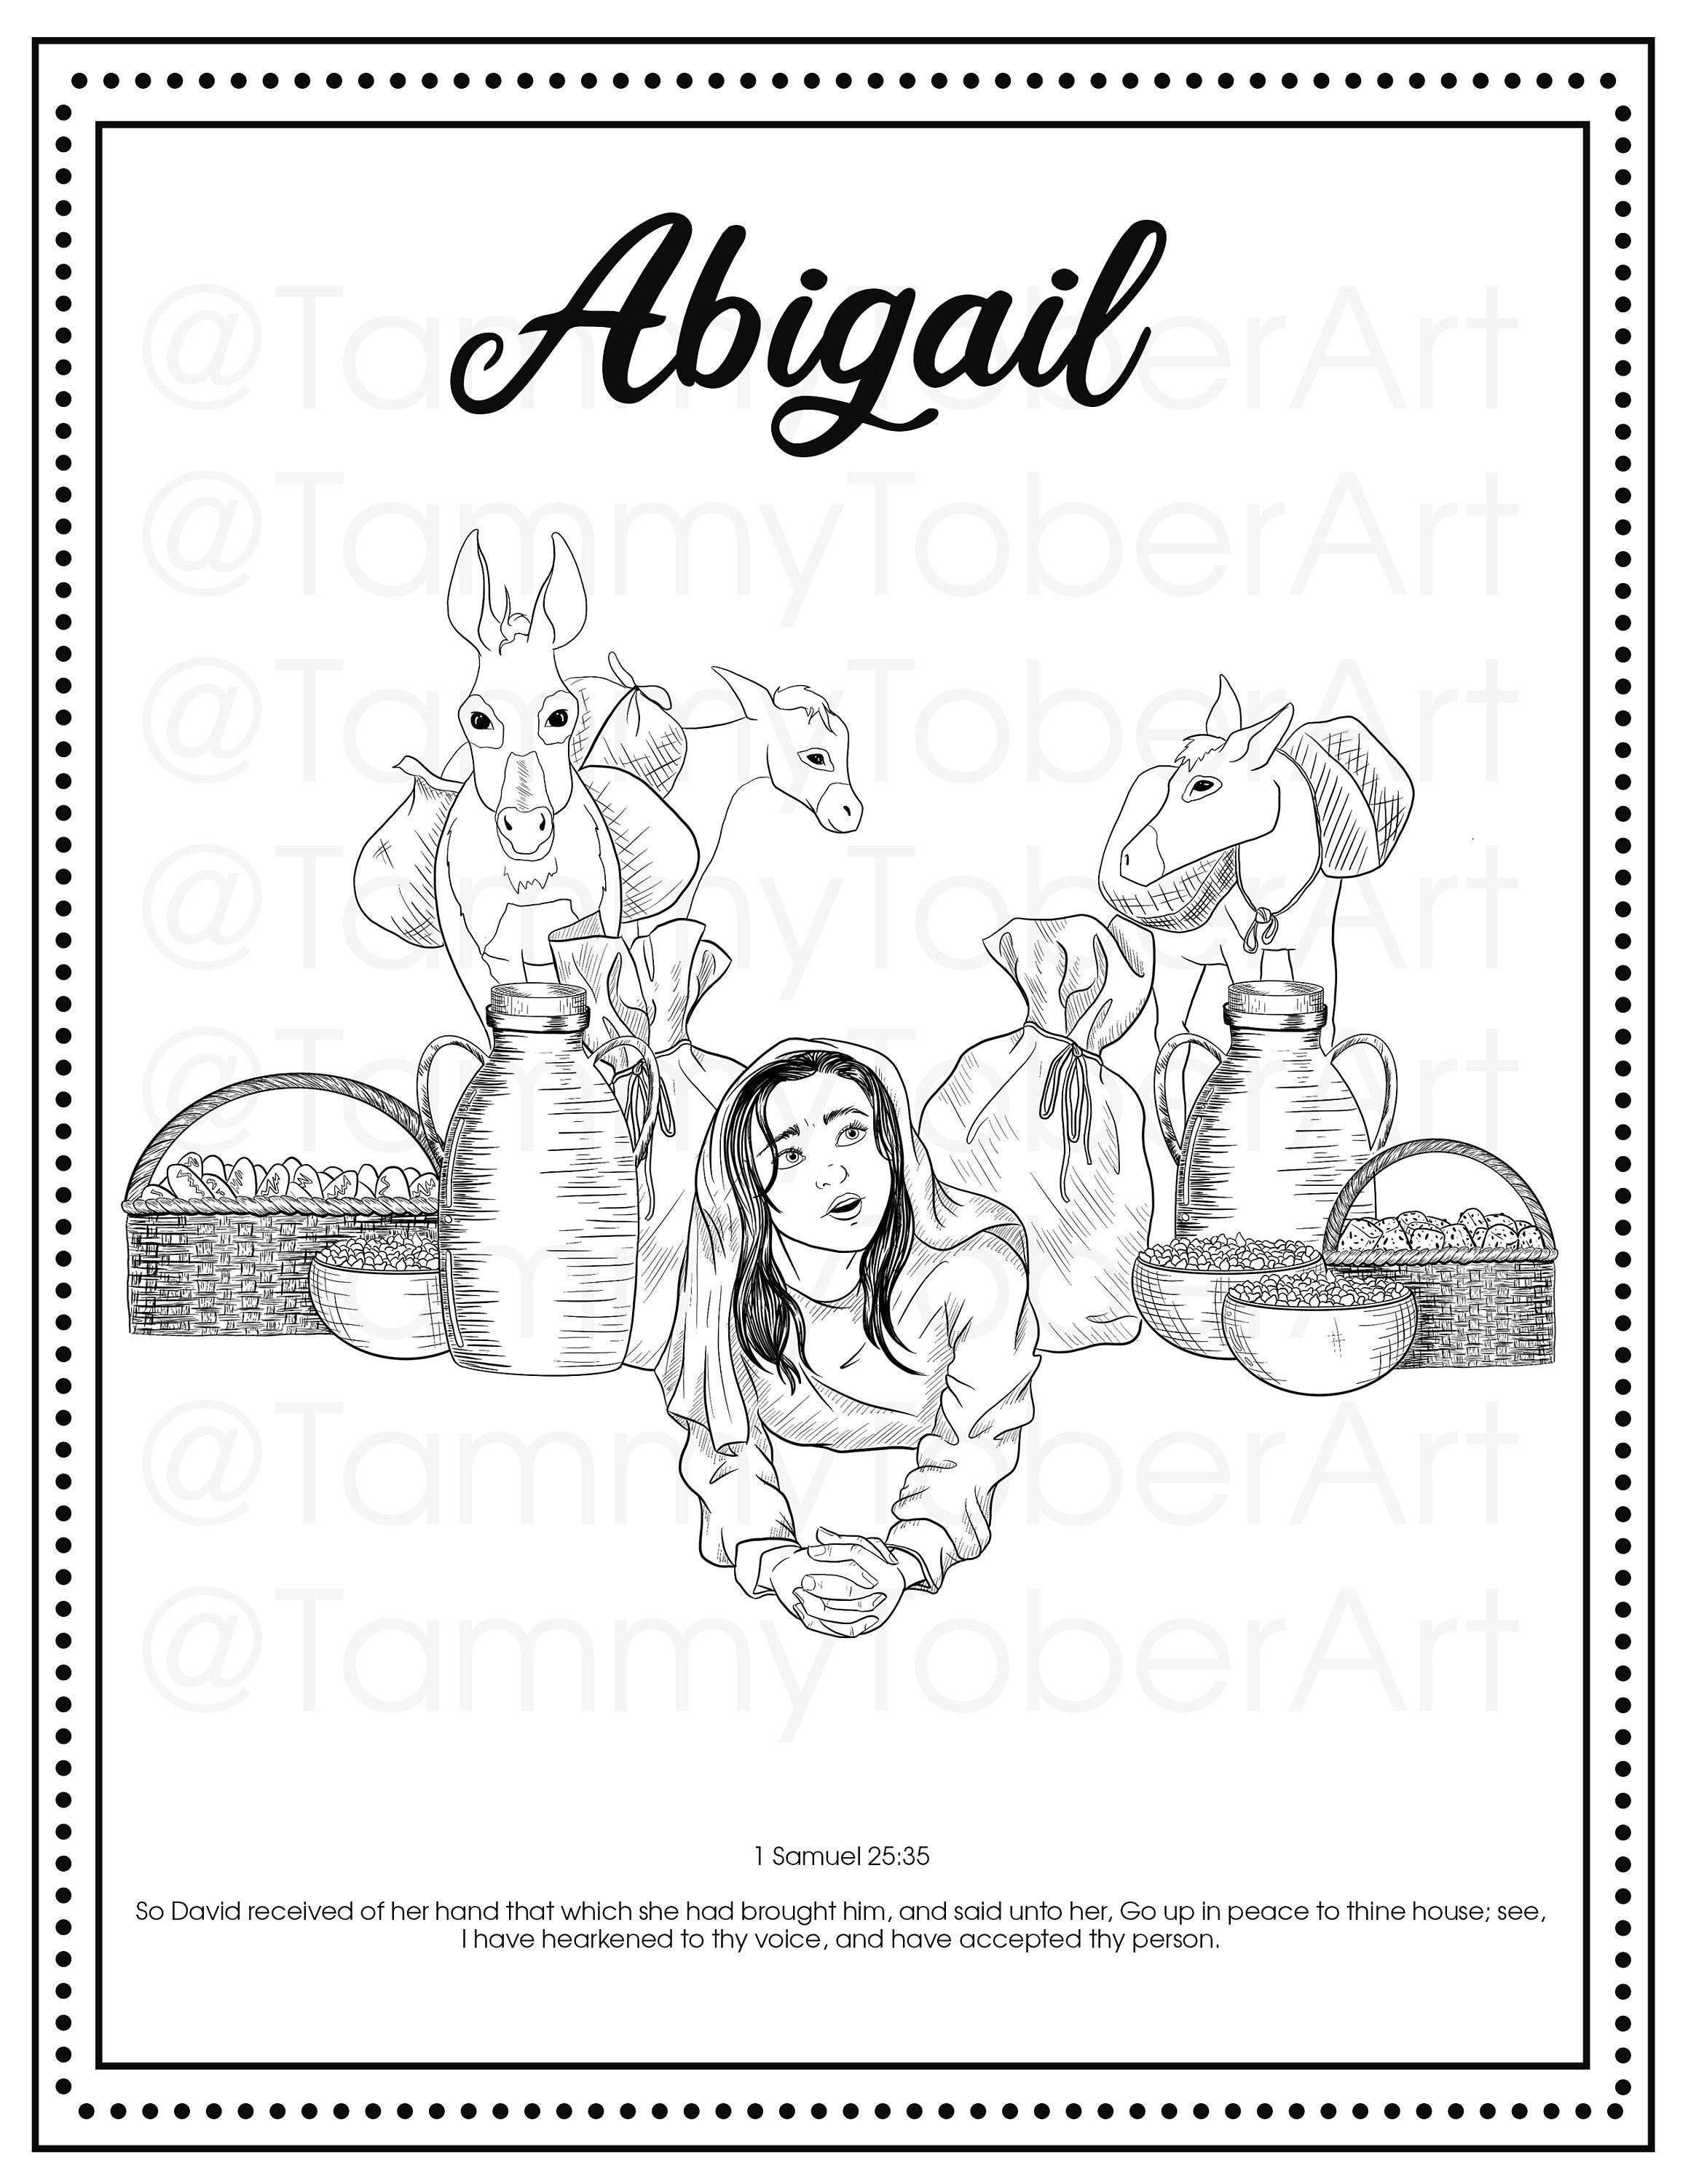 Women of the bible abigail coloring page printable download king james bible kjv coloring sheet sunday school or adult christian coloring instant download